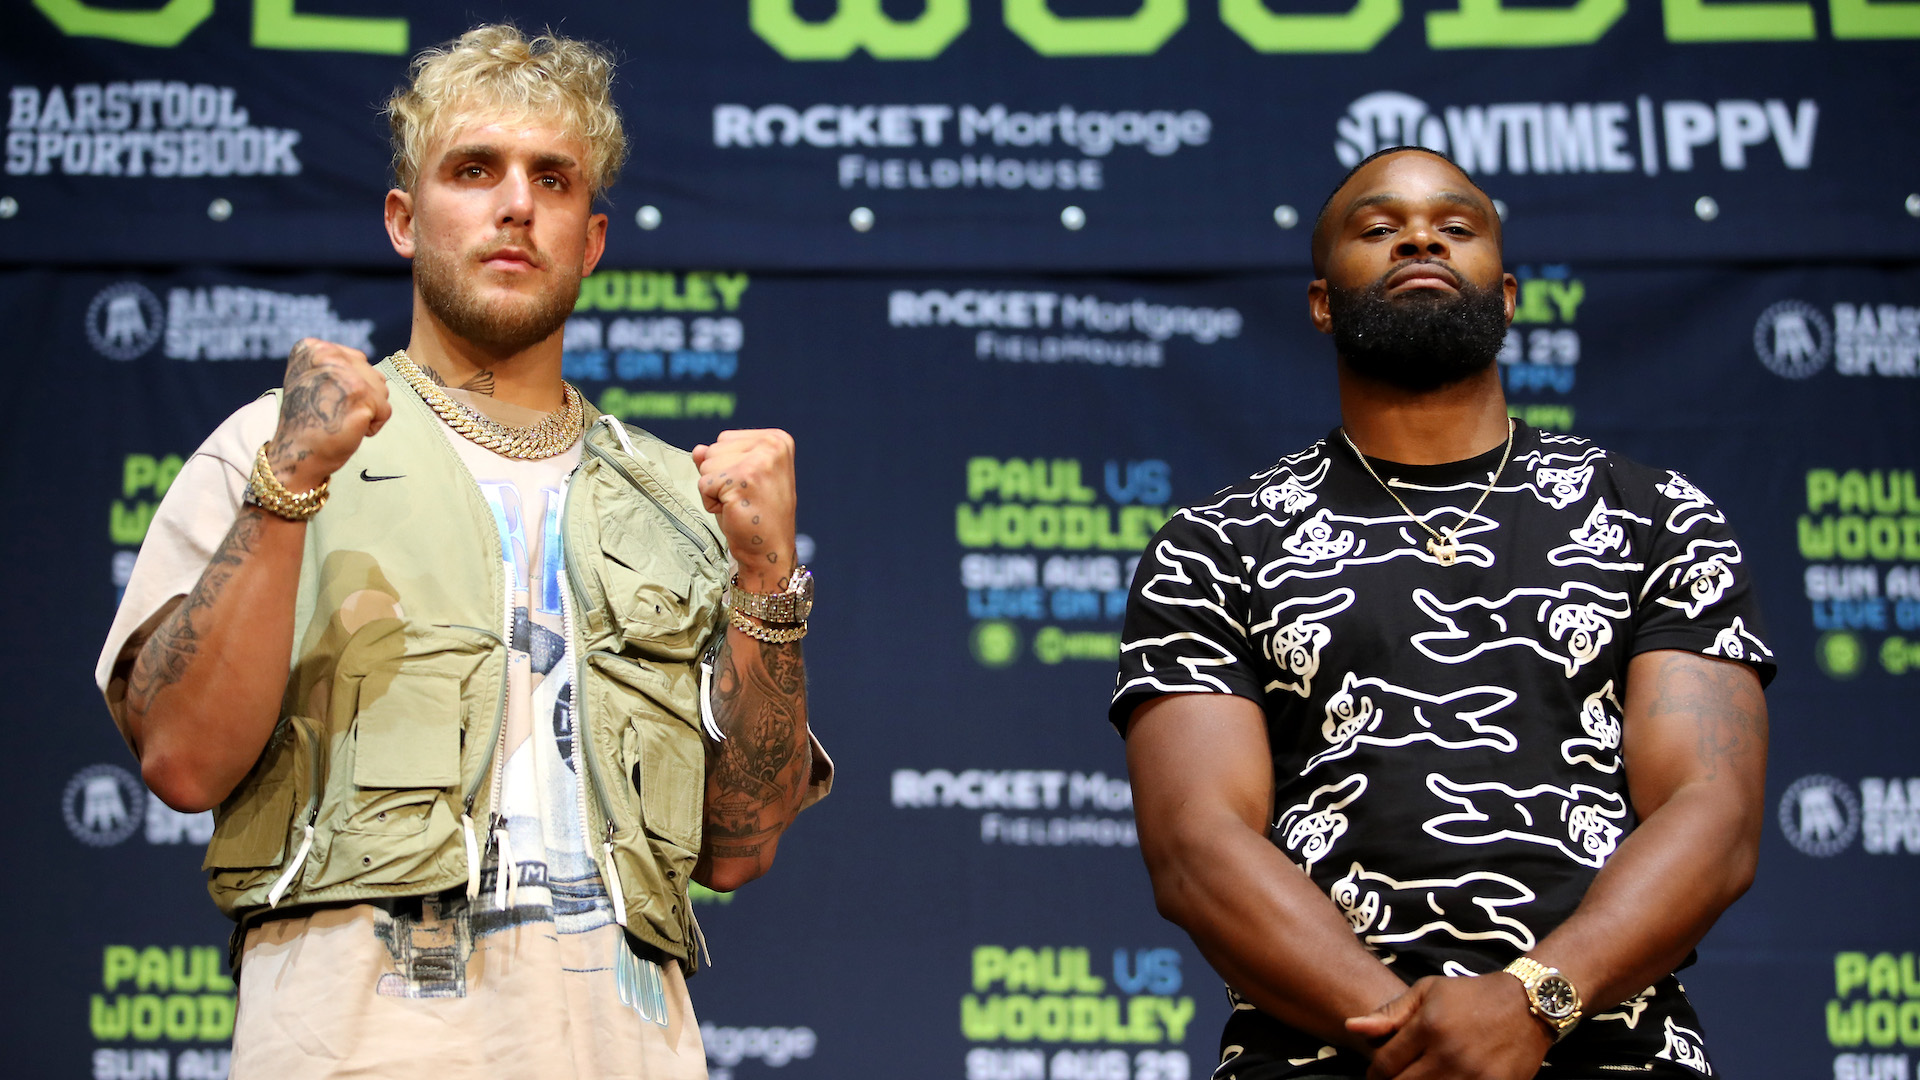 How to Watch the Jake Paul vs. Tyron Woodley Boxing Match